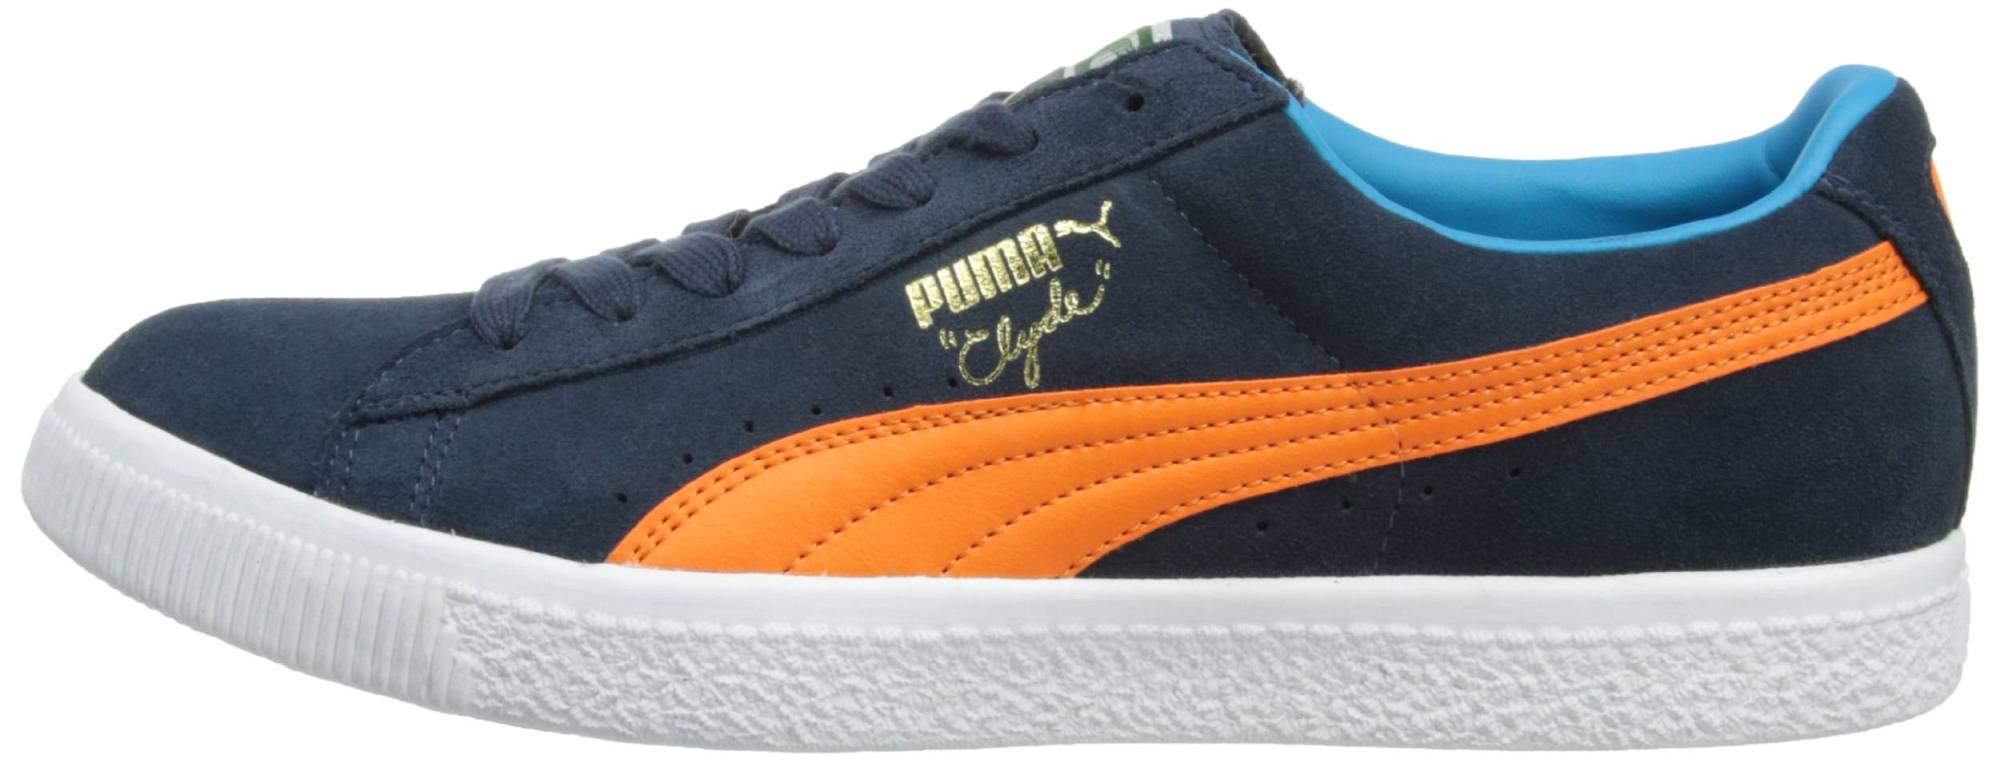 Puma Clyde Script – Shoes Reviews & Reasons To Buy